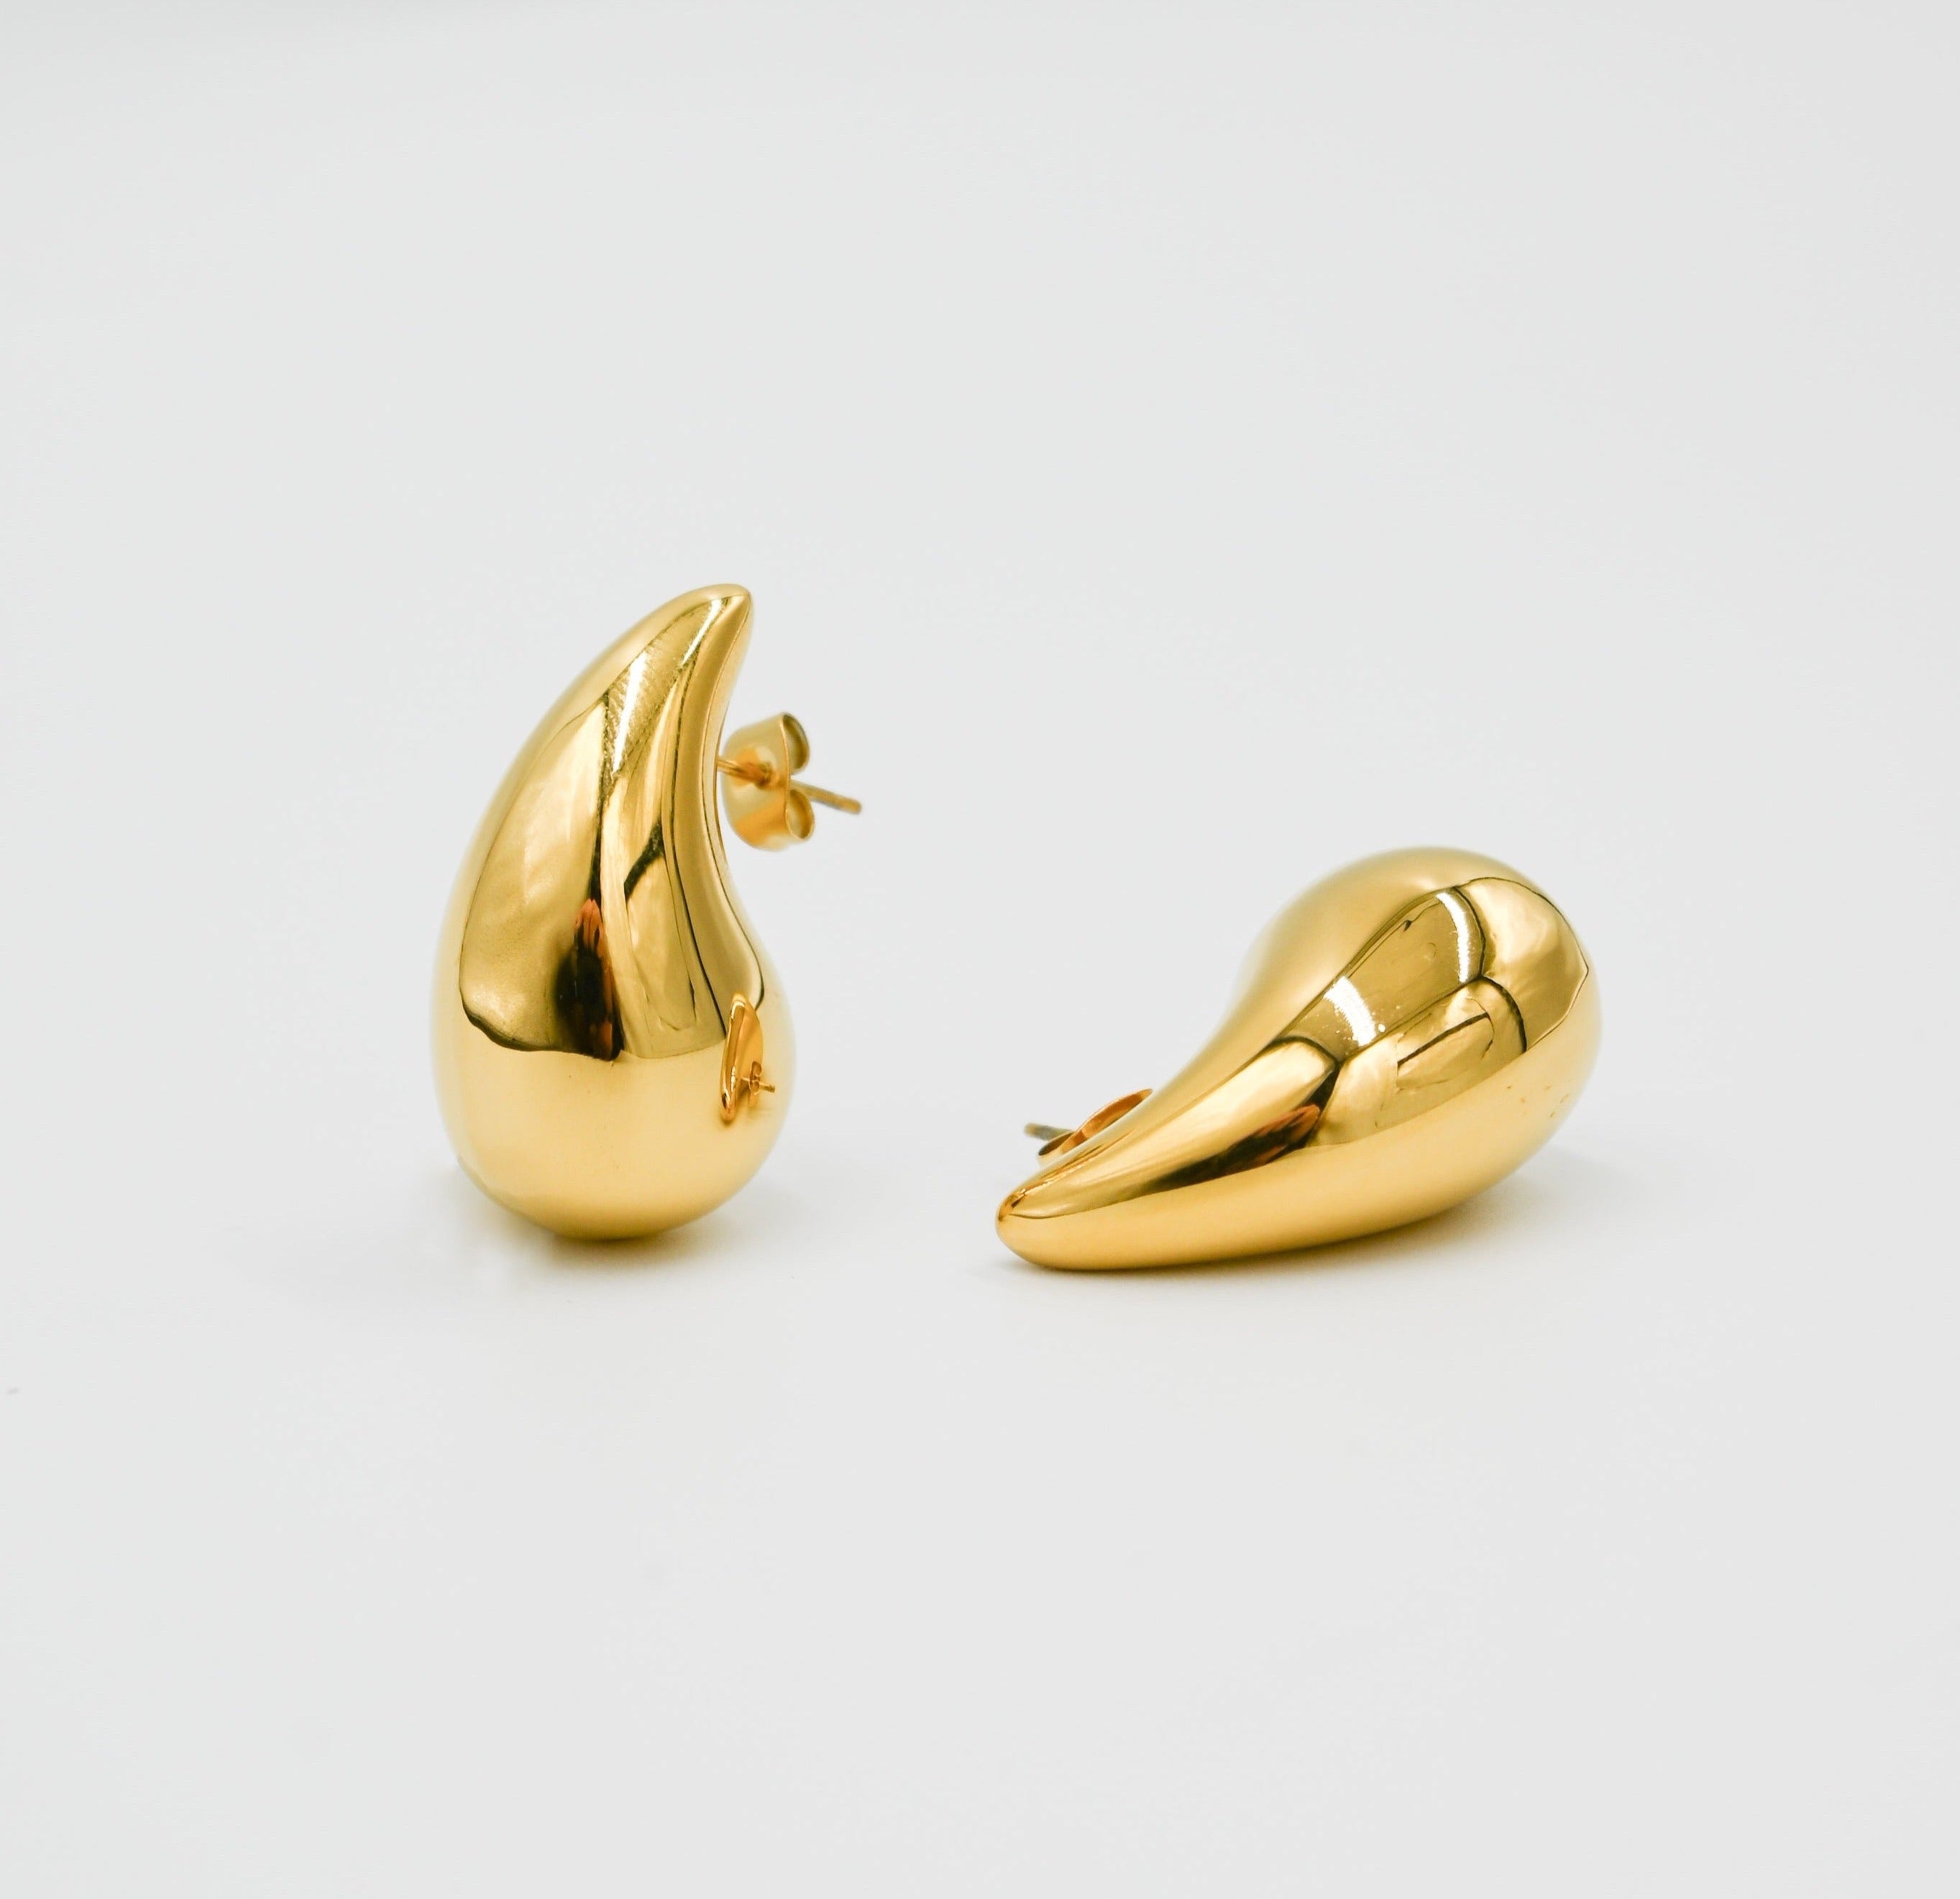 OPTIMIZE_BACKUP_PRODUCT_chunky bottega tear drop style earring in gold